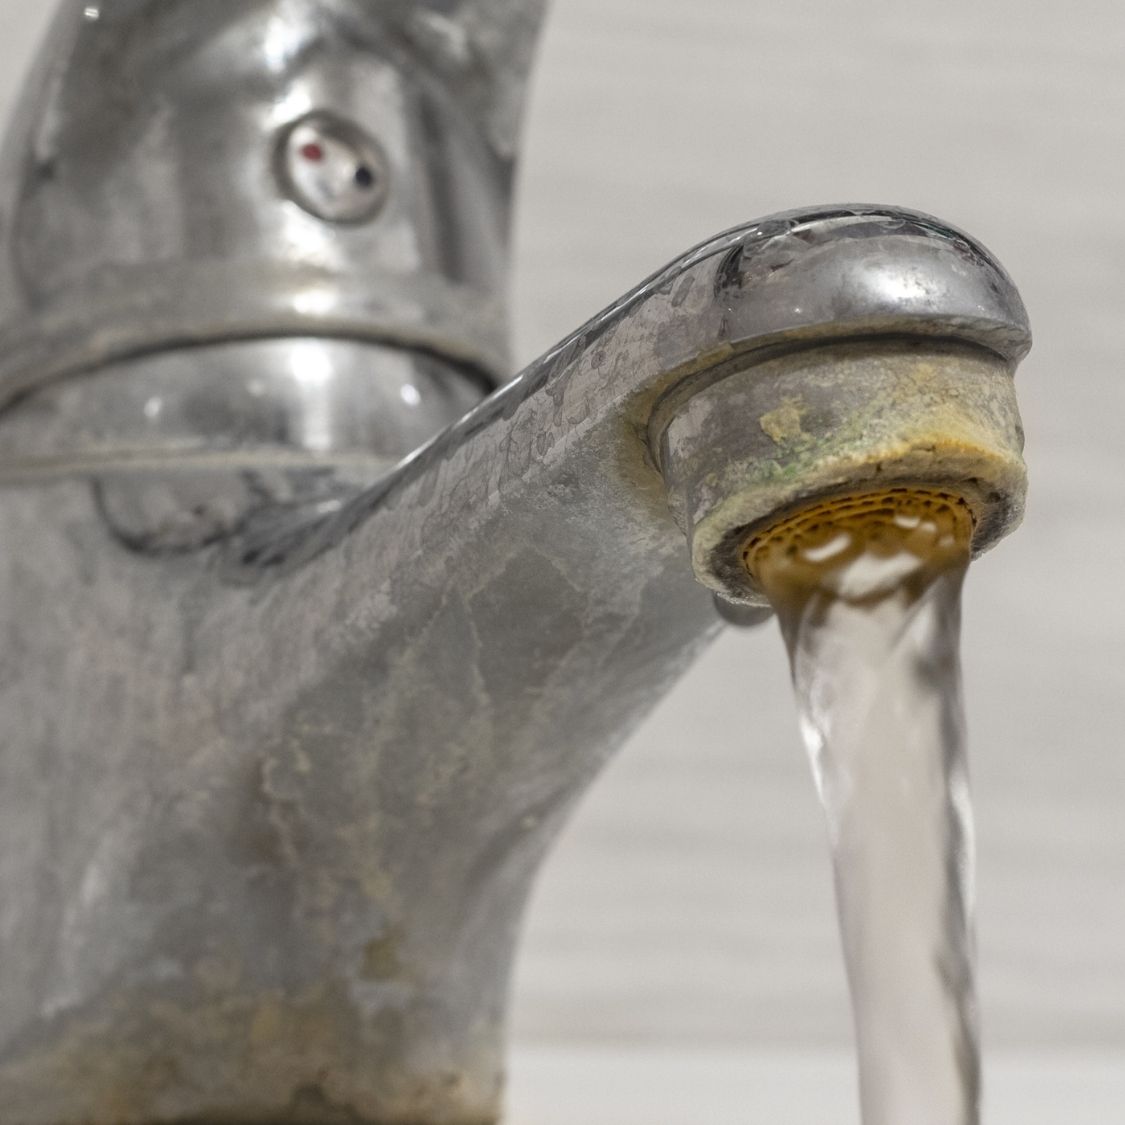 Hard Water: How It Impacts Your Home and Body